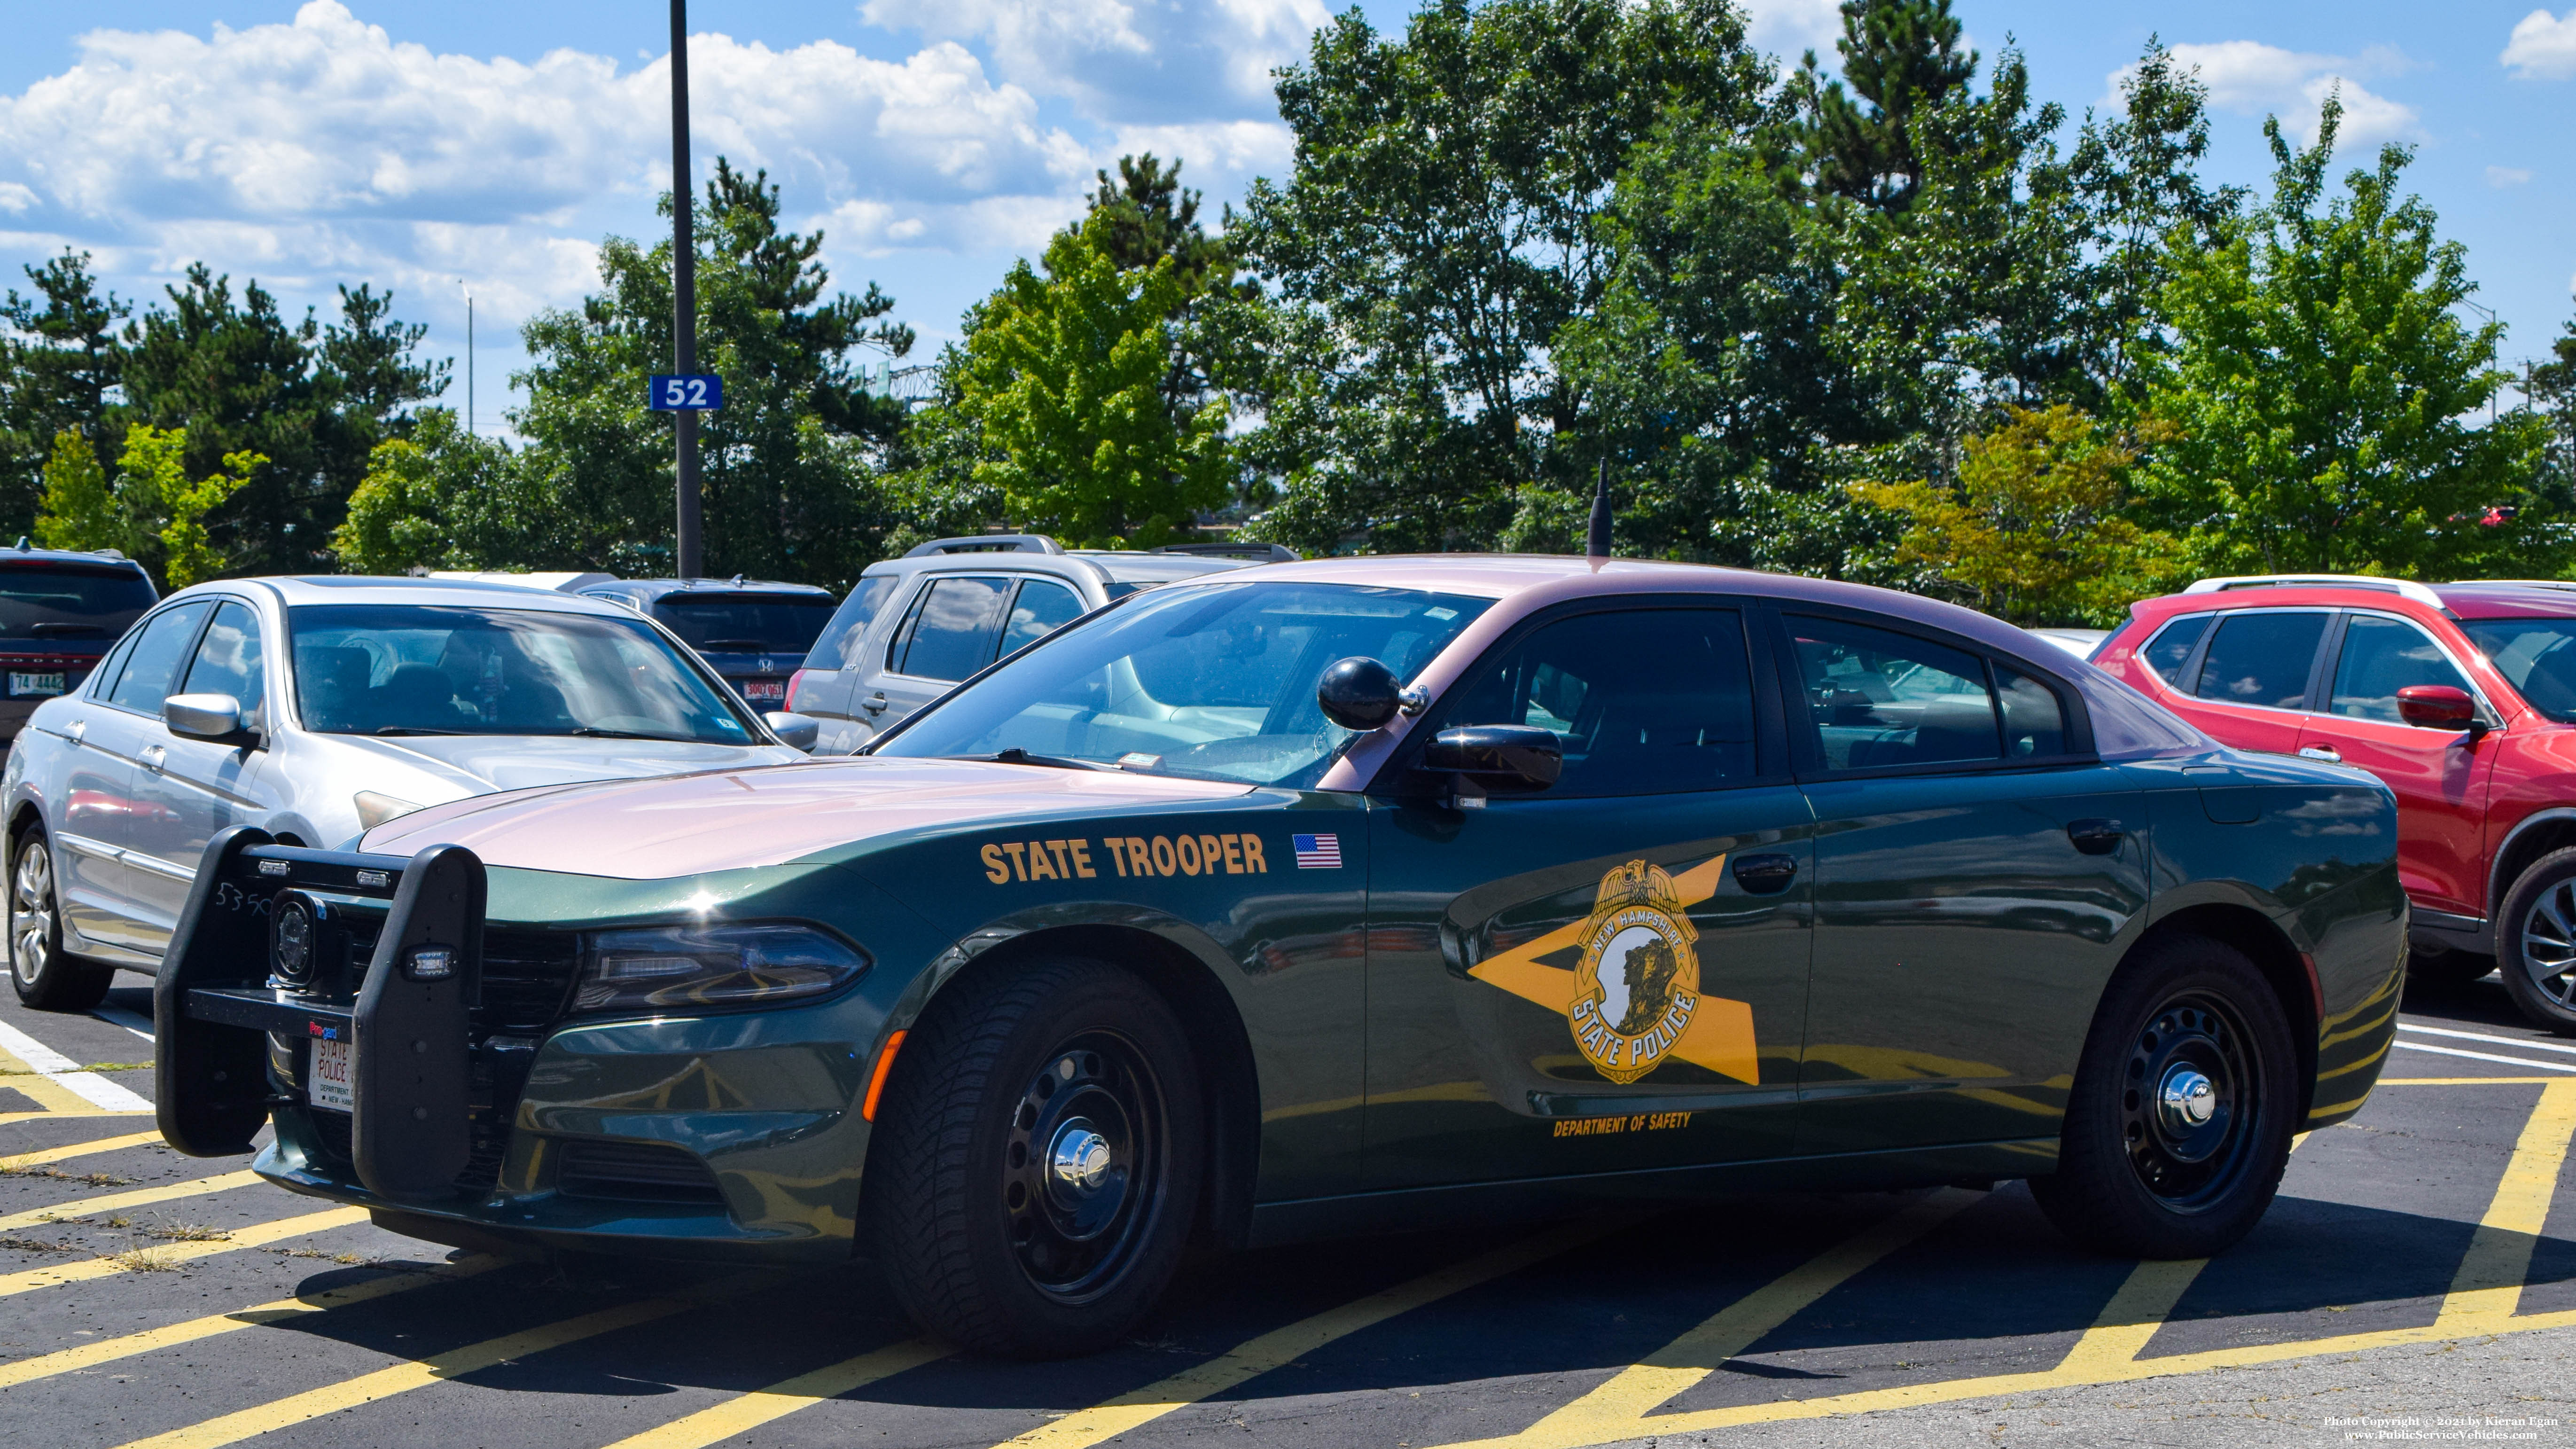 A photo  of New Hampshire State Police
            Cruiser 203, a 2017-2019 Dodge Charger             taken by Kieran Egan